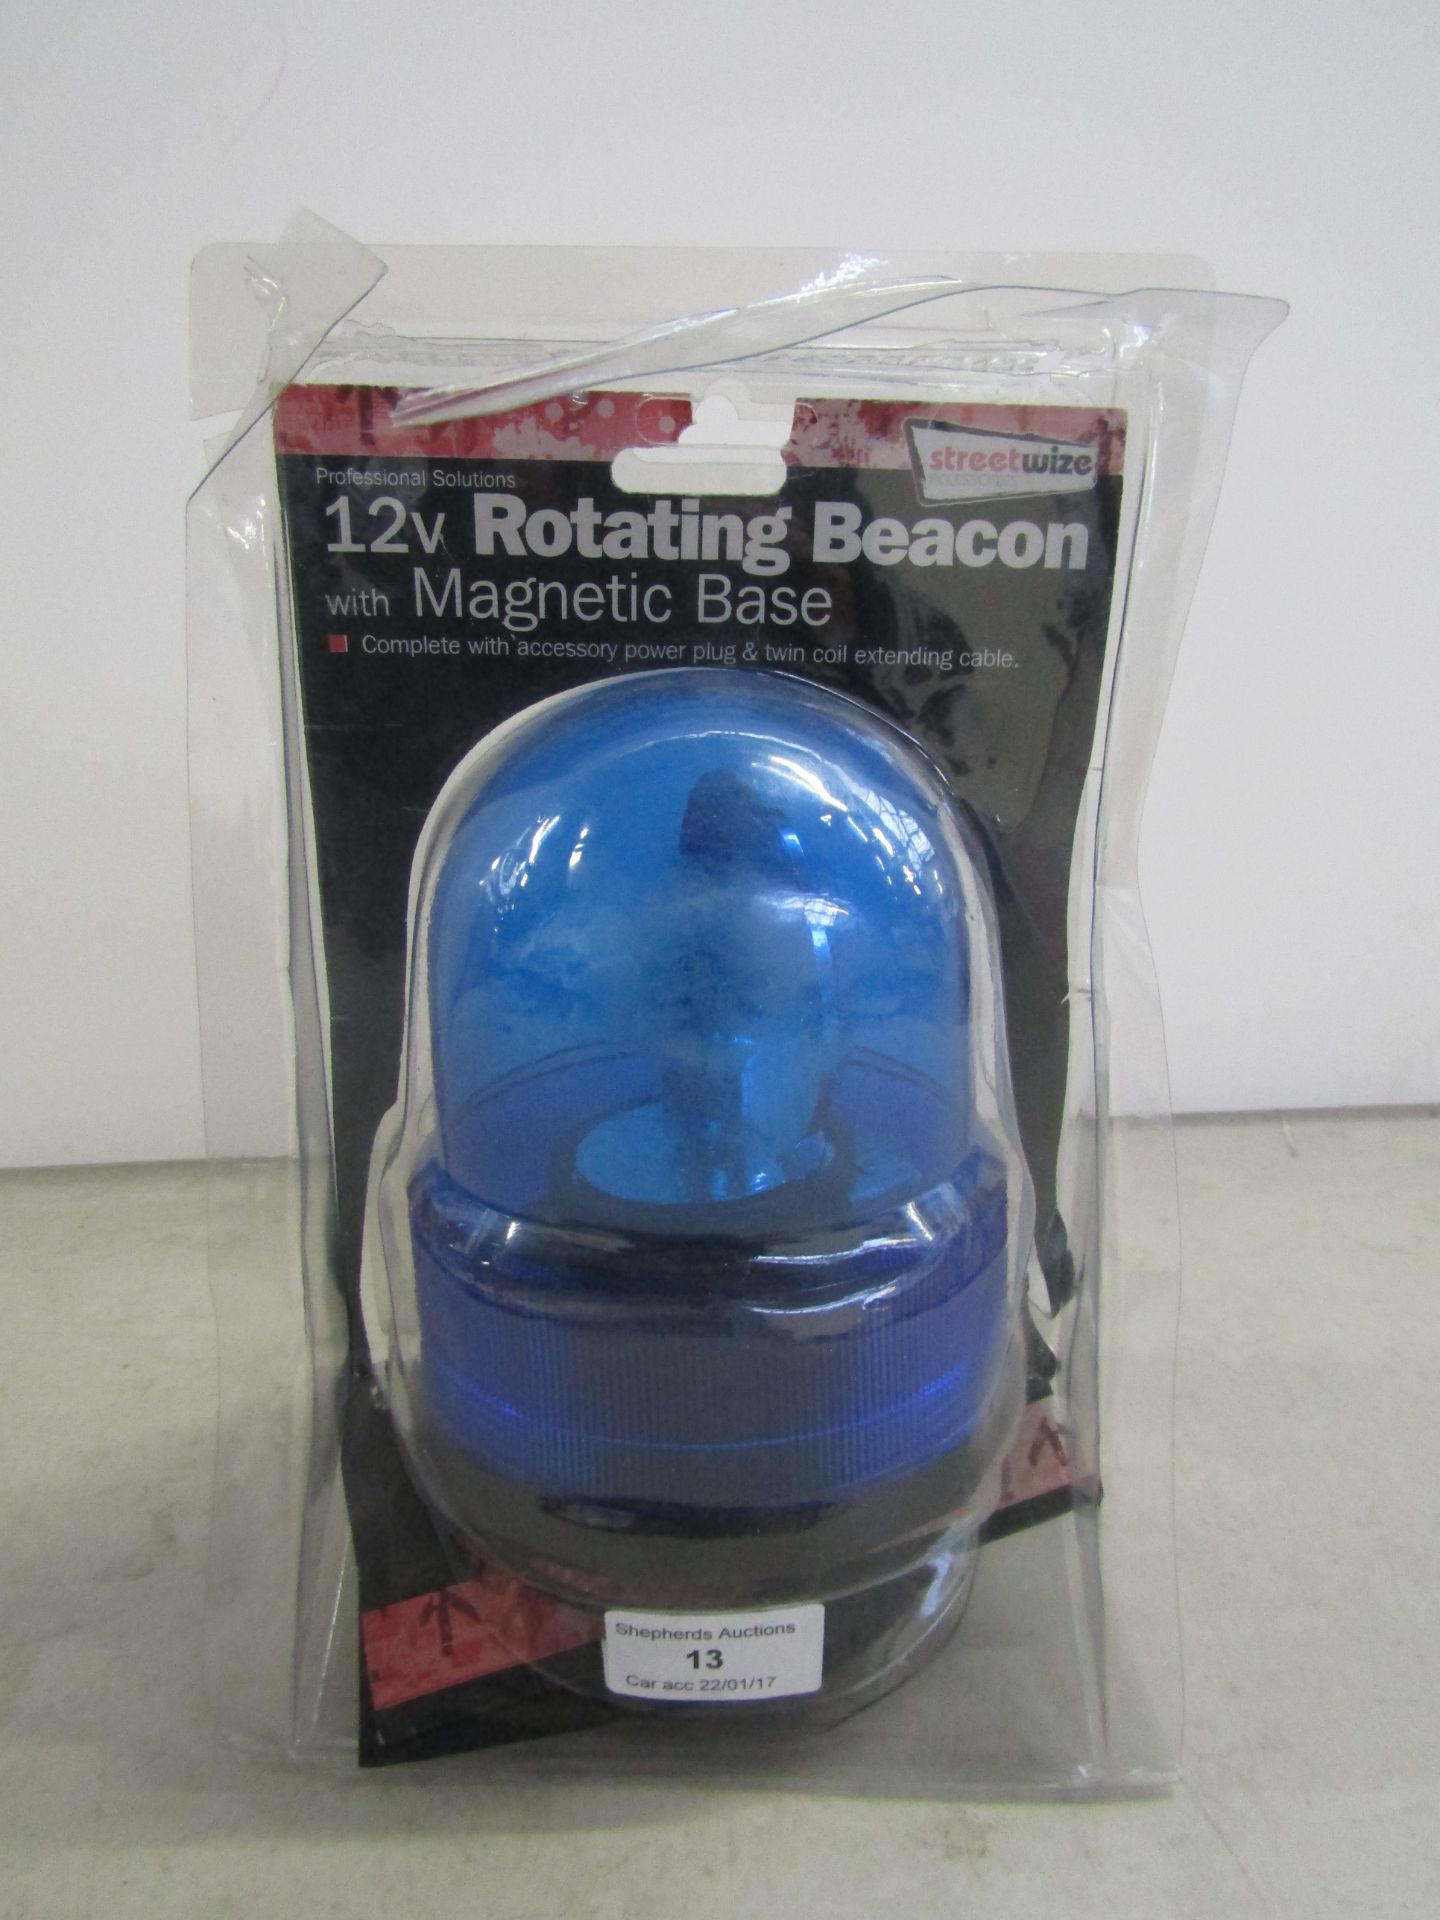 12V Rotating beacon with magnetic base, unchecked in packaging.